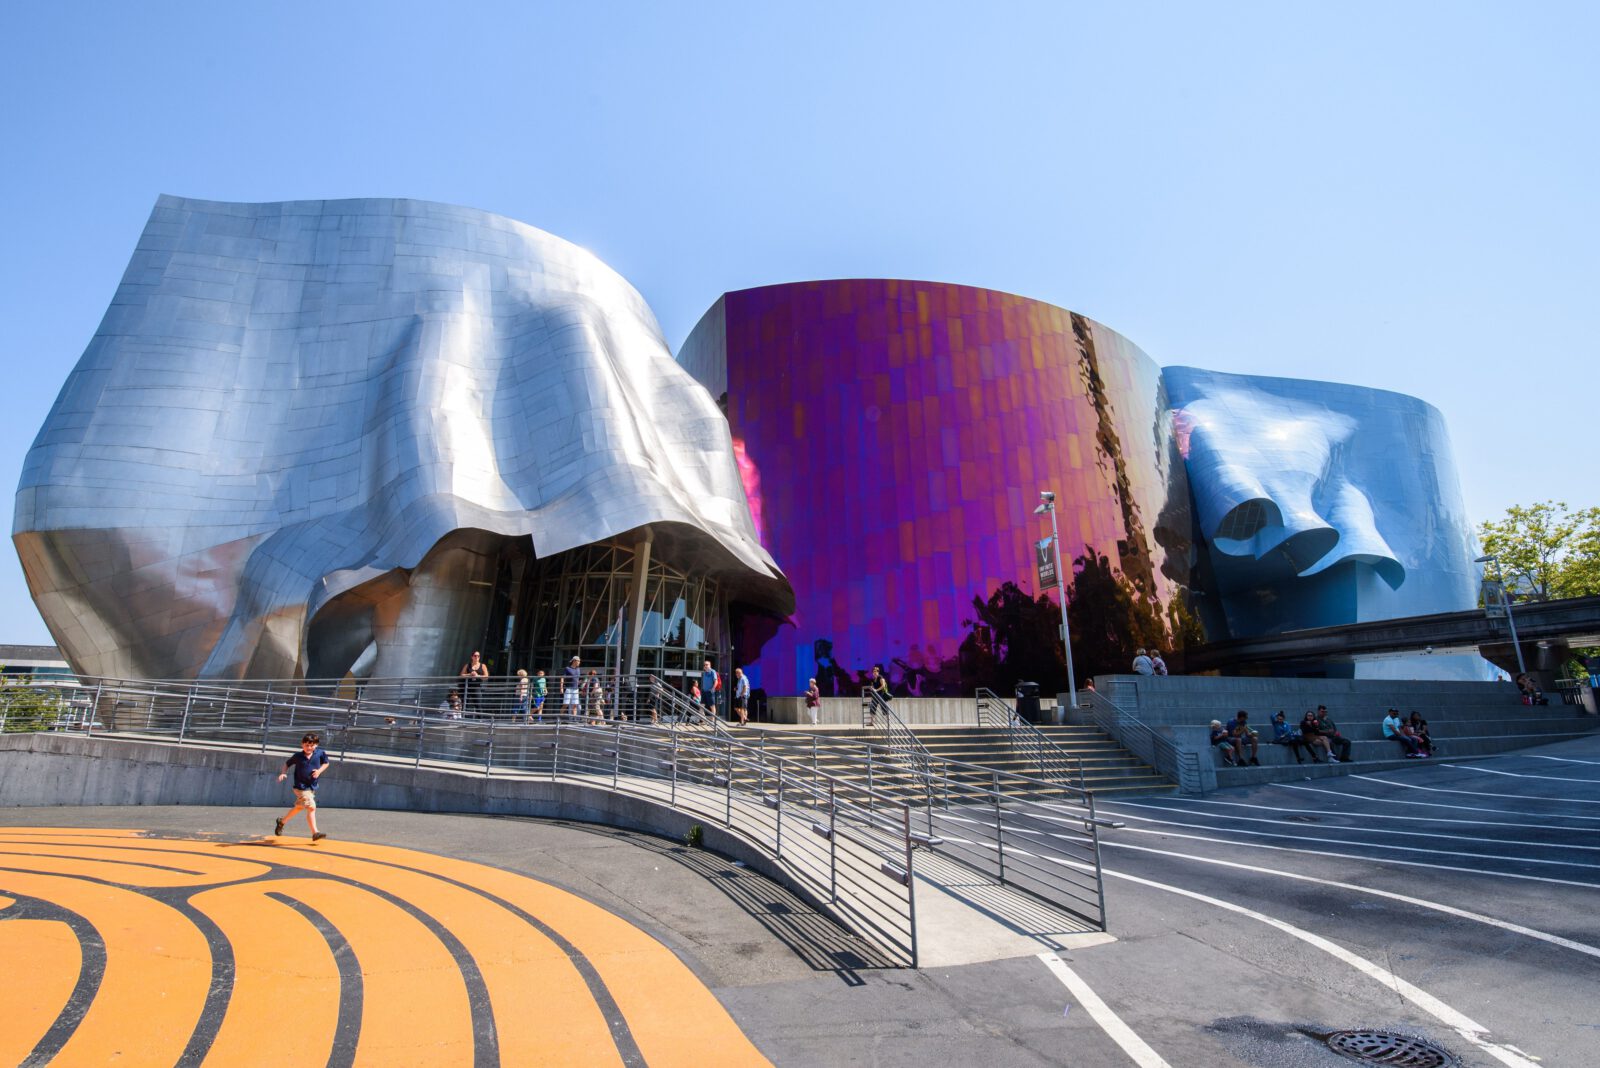 Archisearch Take A Tour of The Groundbreaking Architecture of Frank Gehry Via Google Arts & Culture